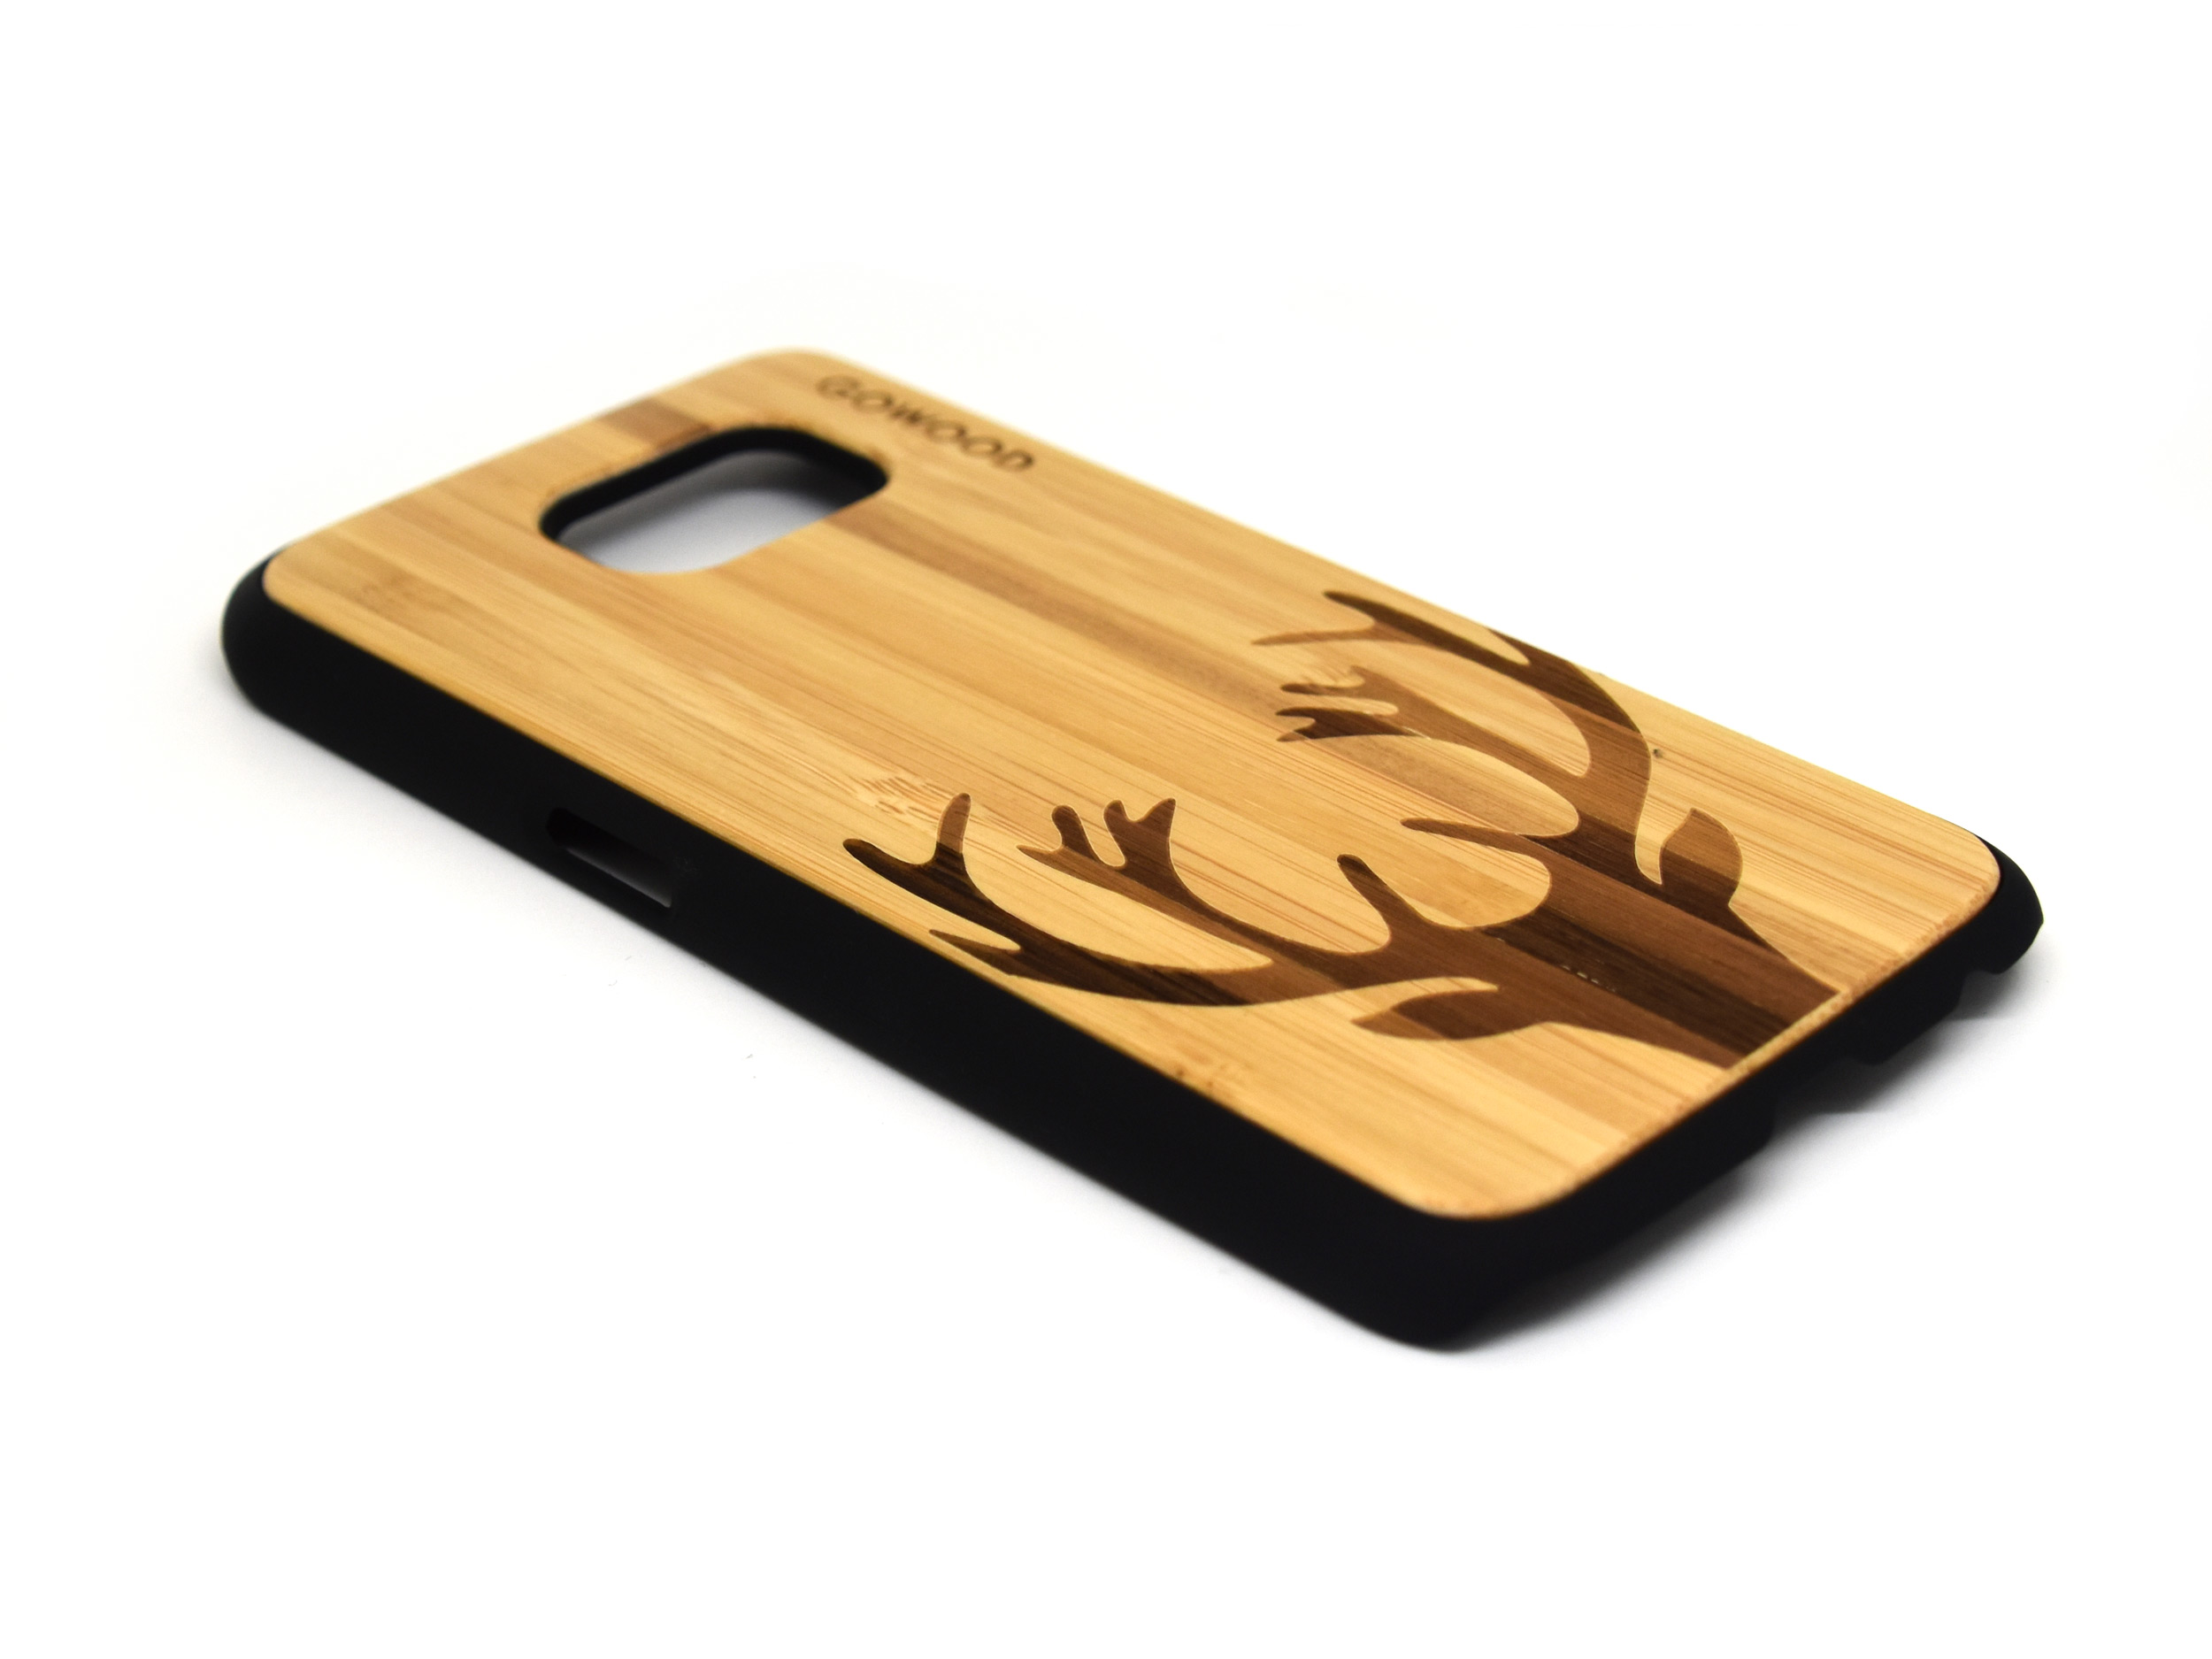 Samsung Galaxy S6 case bamboo wood with deer